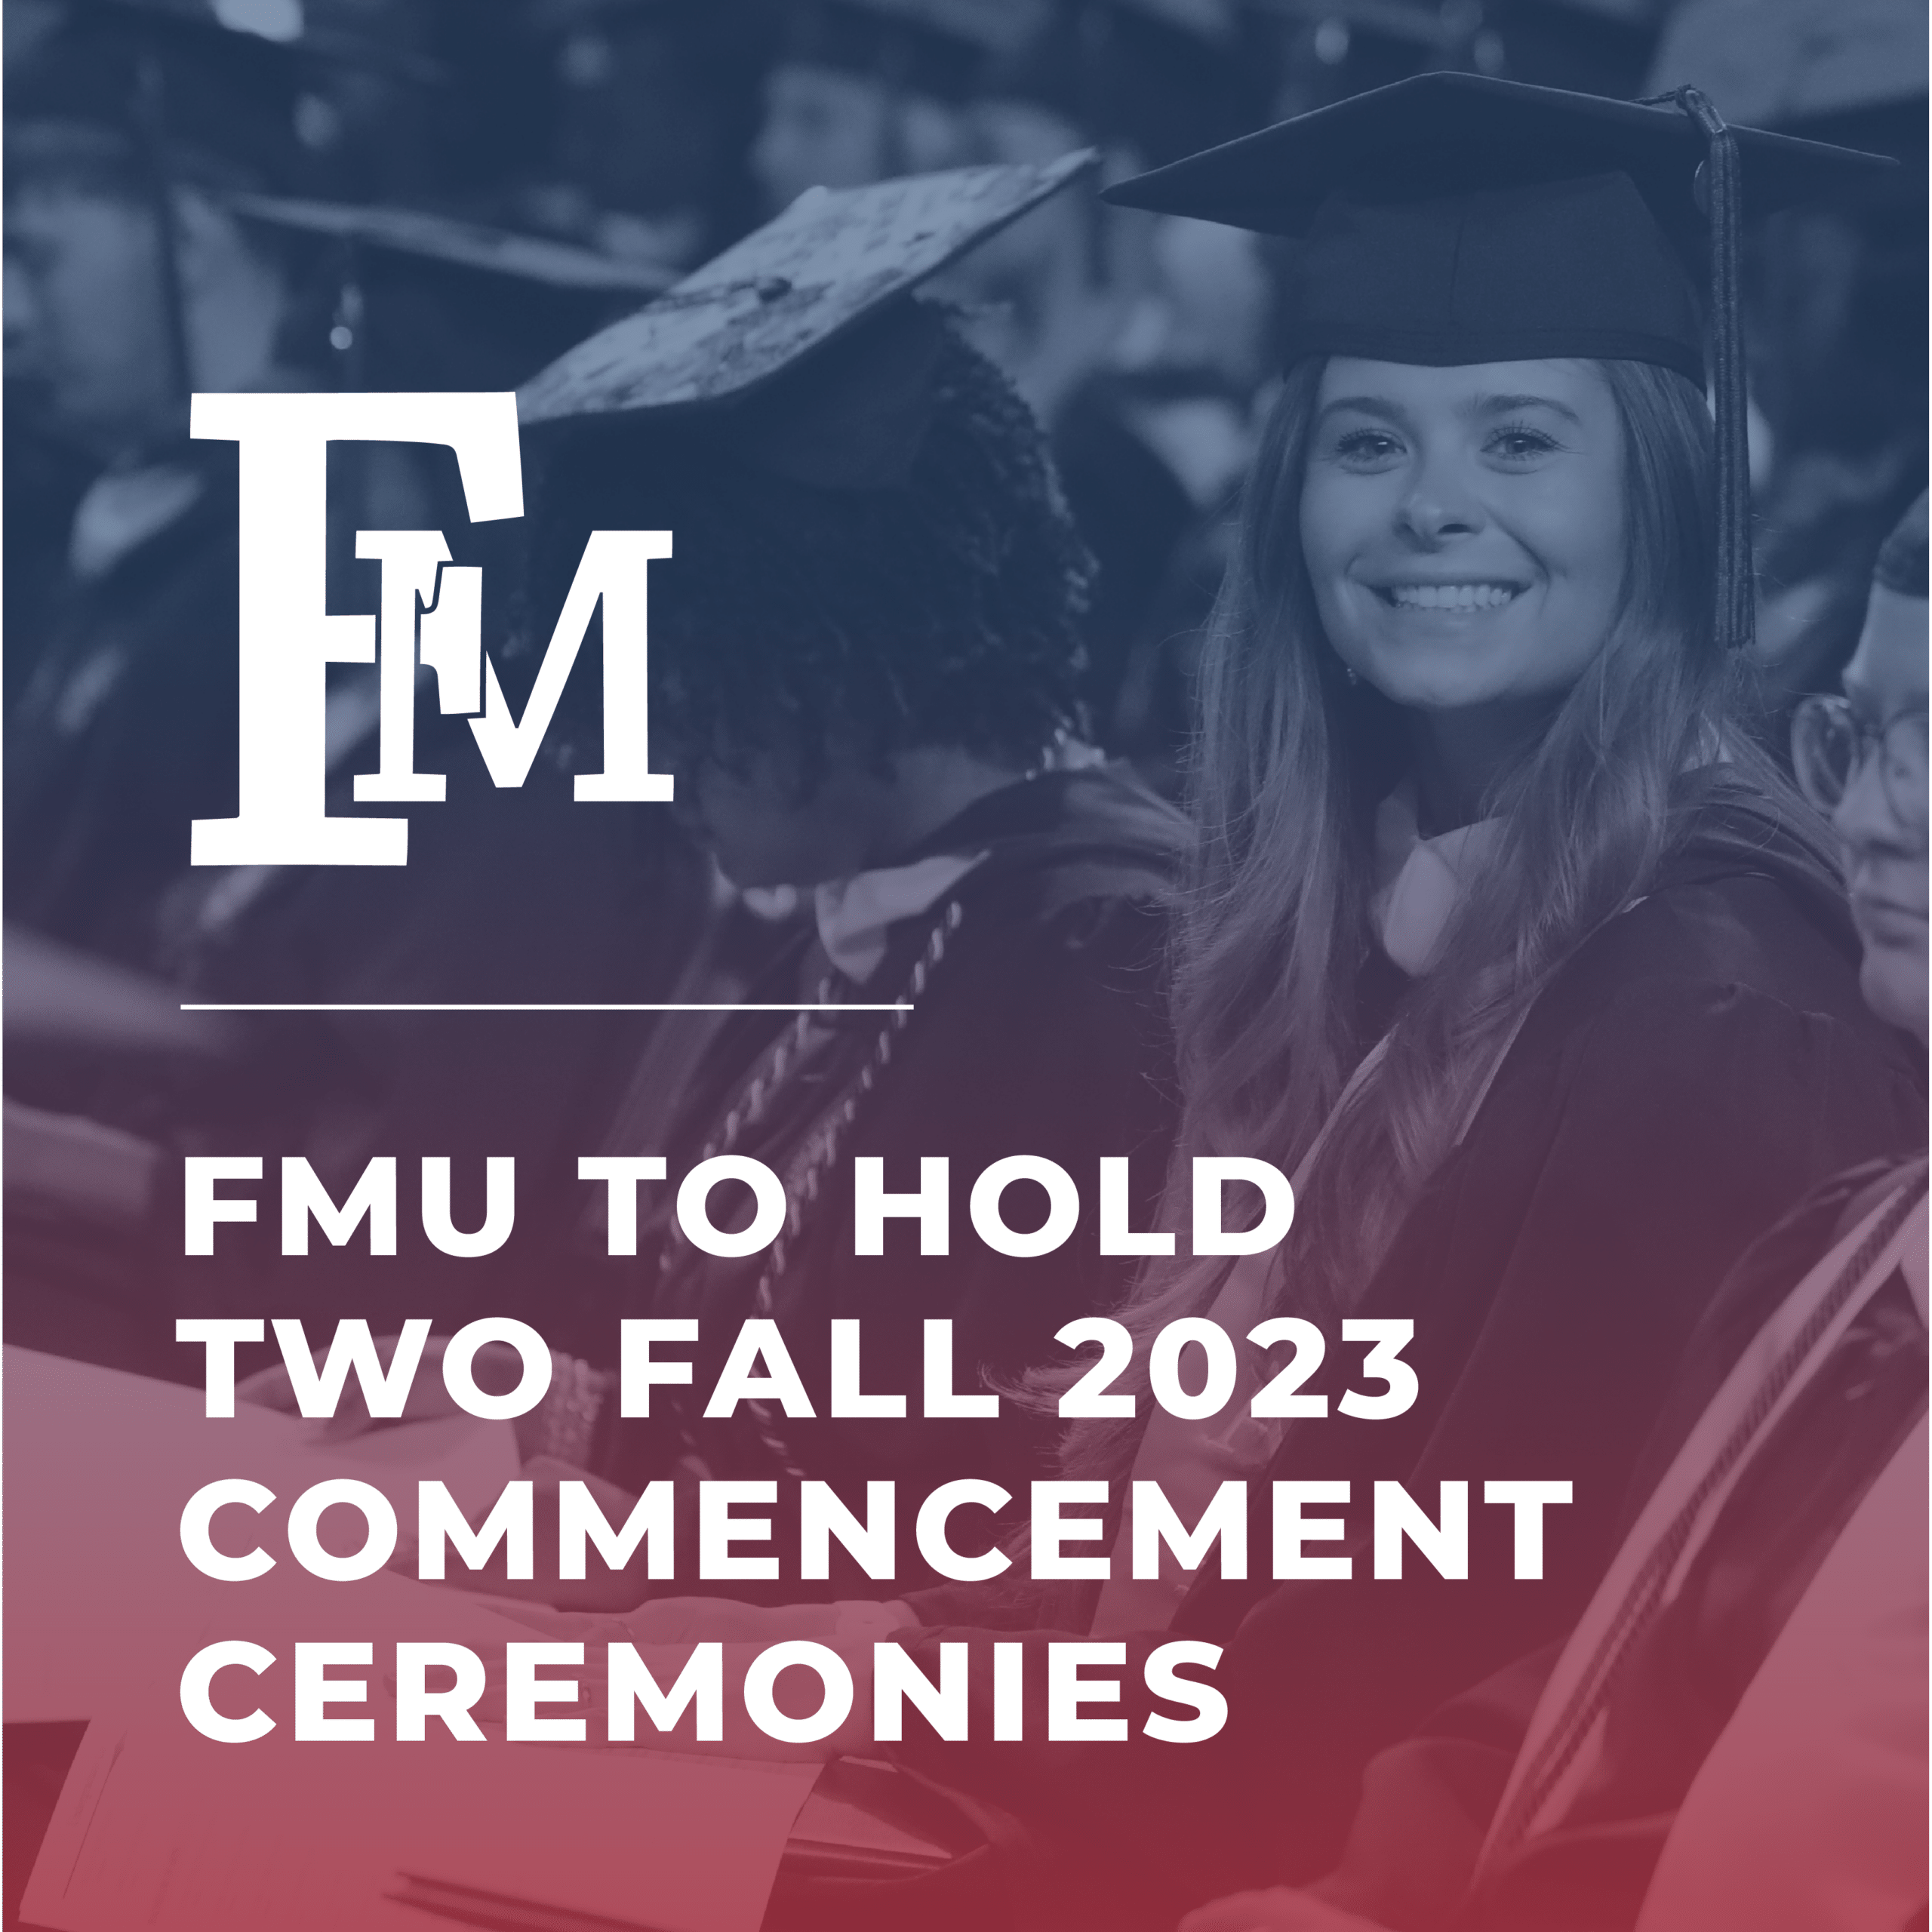 FMU to hold two fall 2023 Commencement Ceremonies